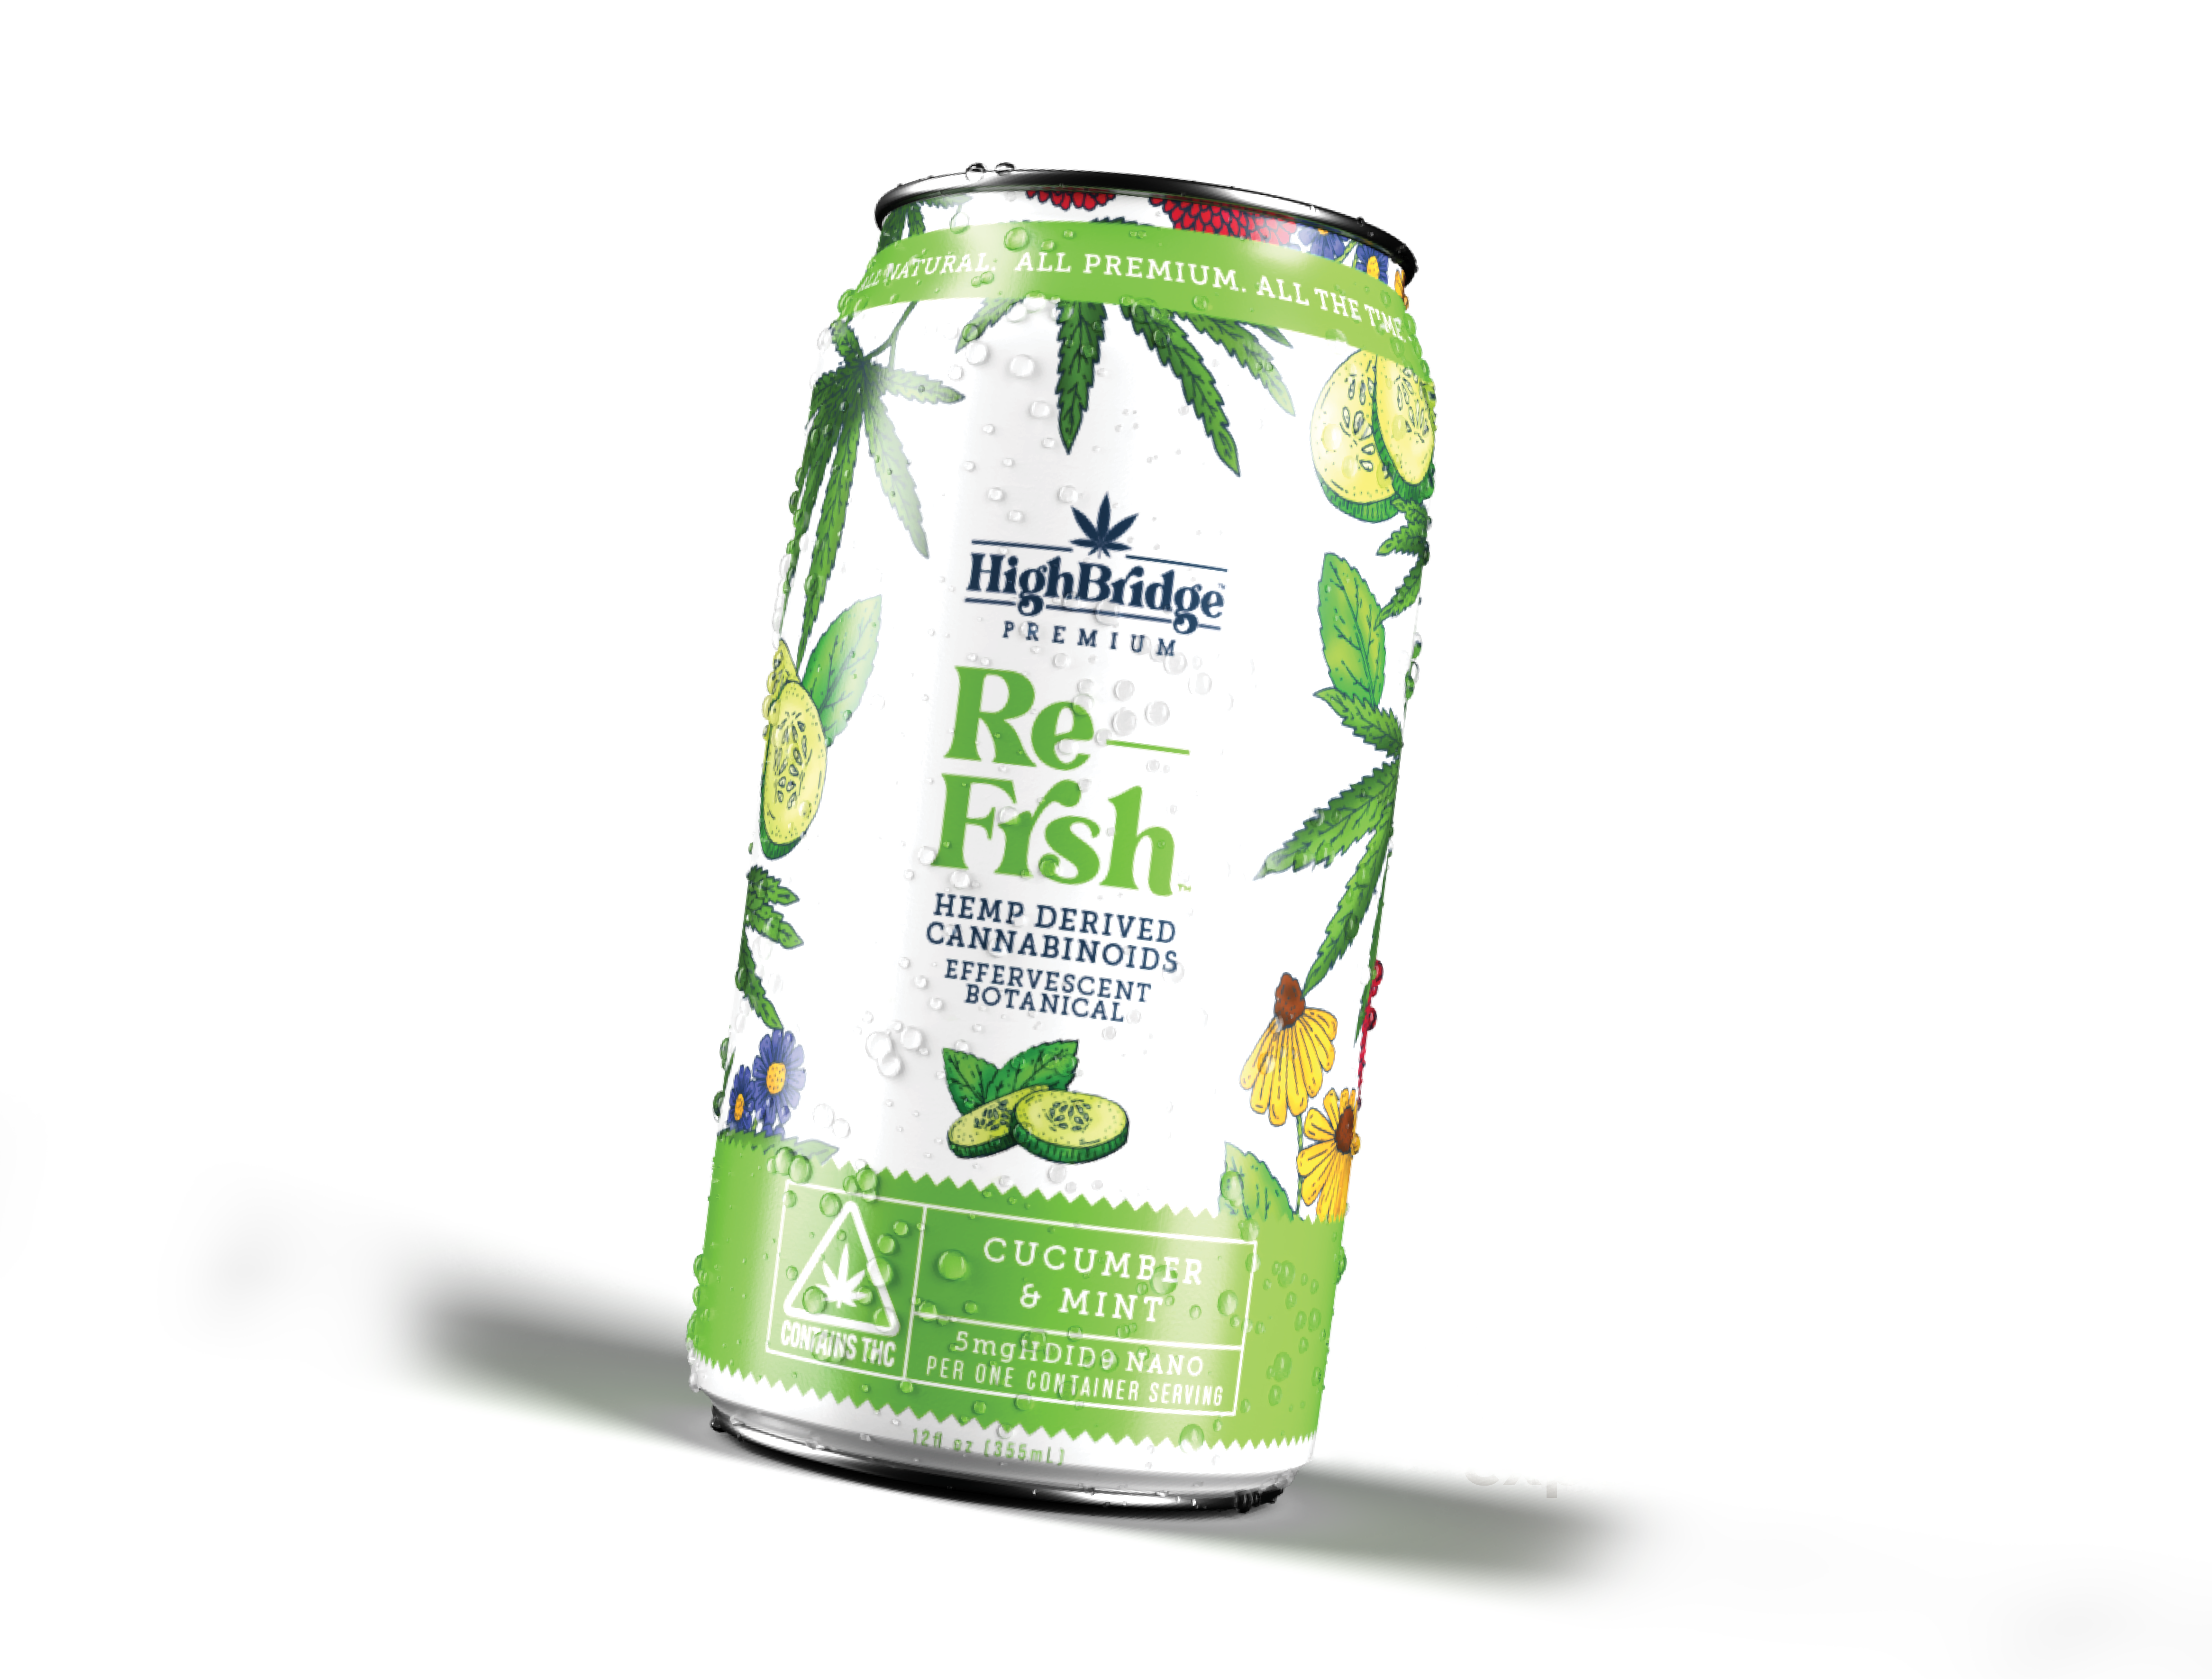 Premium Above All Else - Grab & Go Beverage, Low calorie & low sugar, dialed in efficacies, a mind and mood experience, delicious flavors